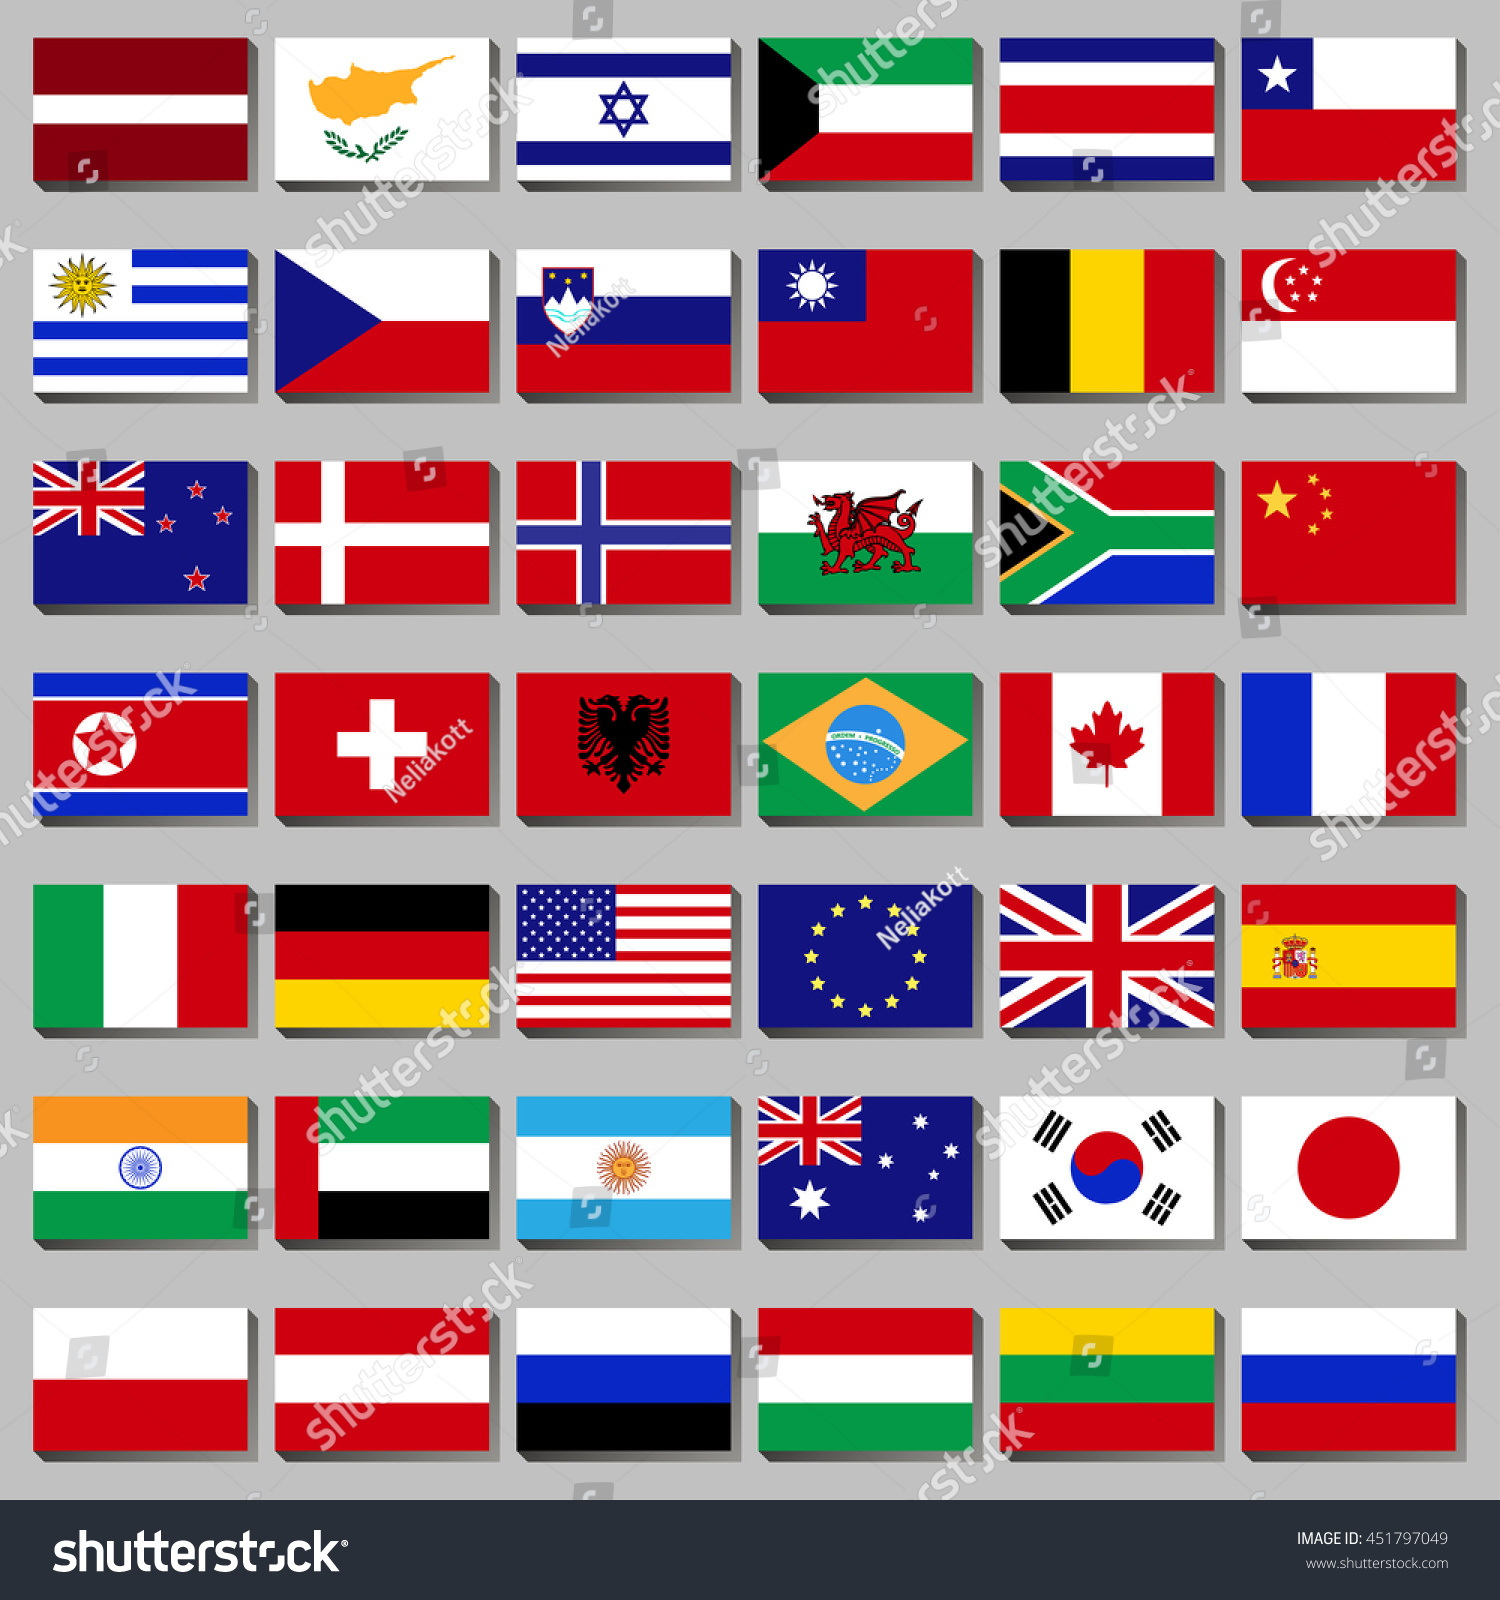 Famous Country Set Flags Shadow On Stock Vector 451797049 - Shutterstock